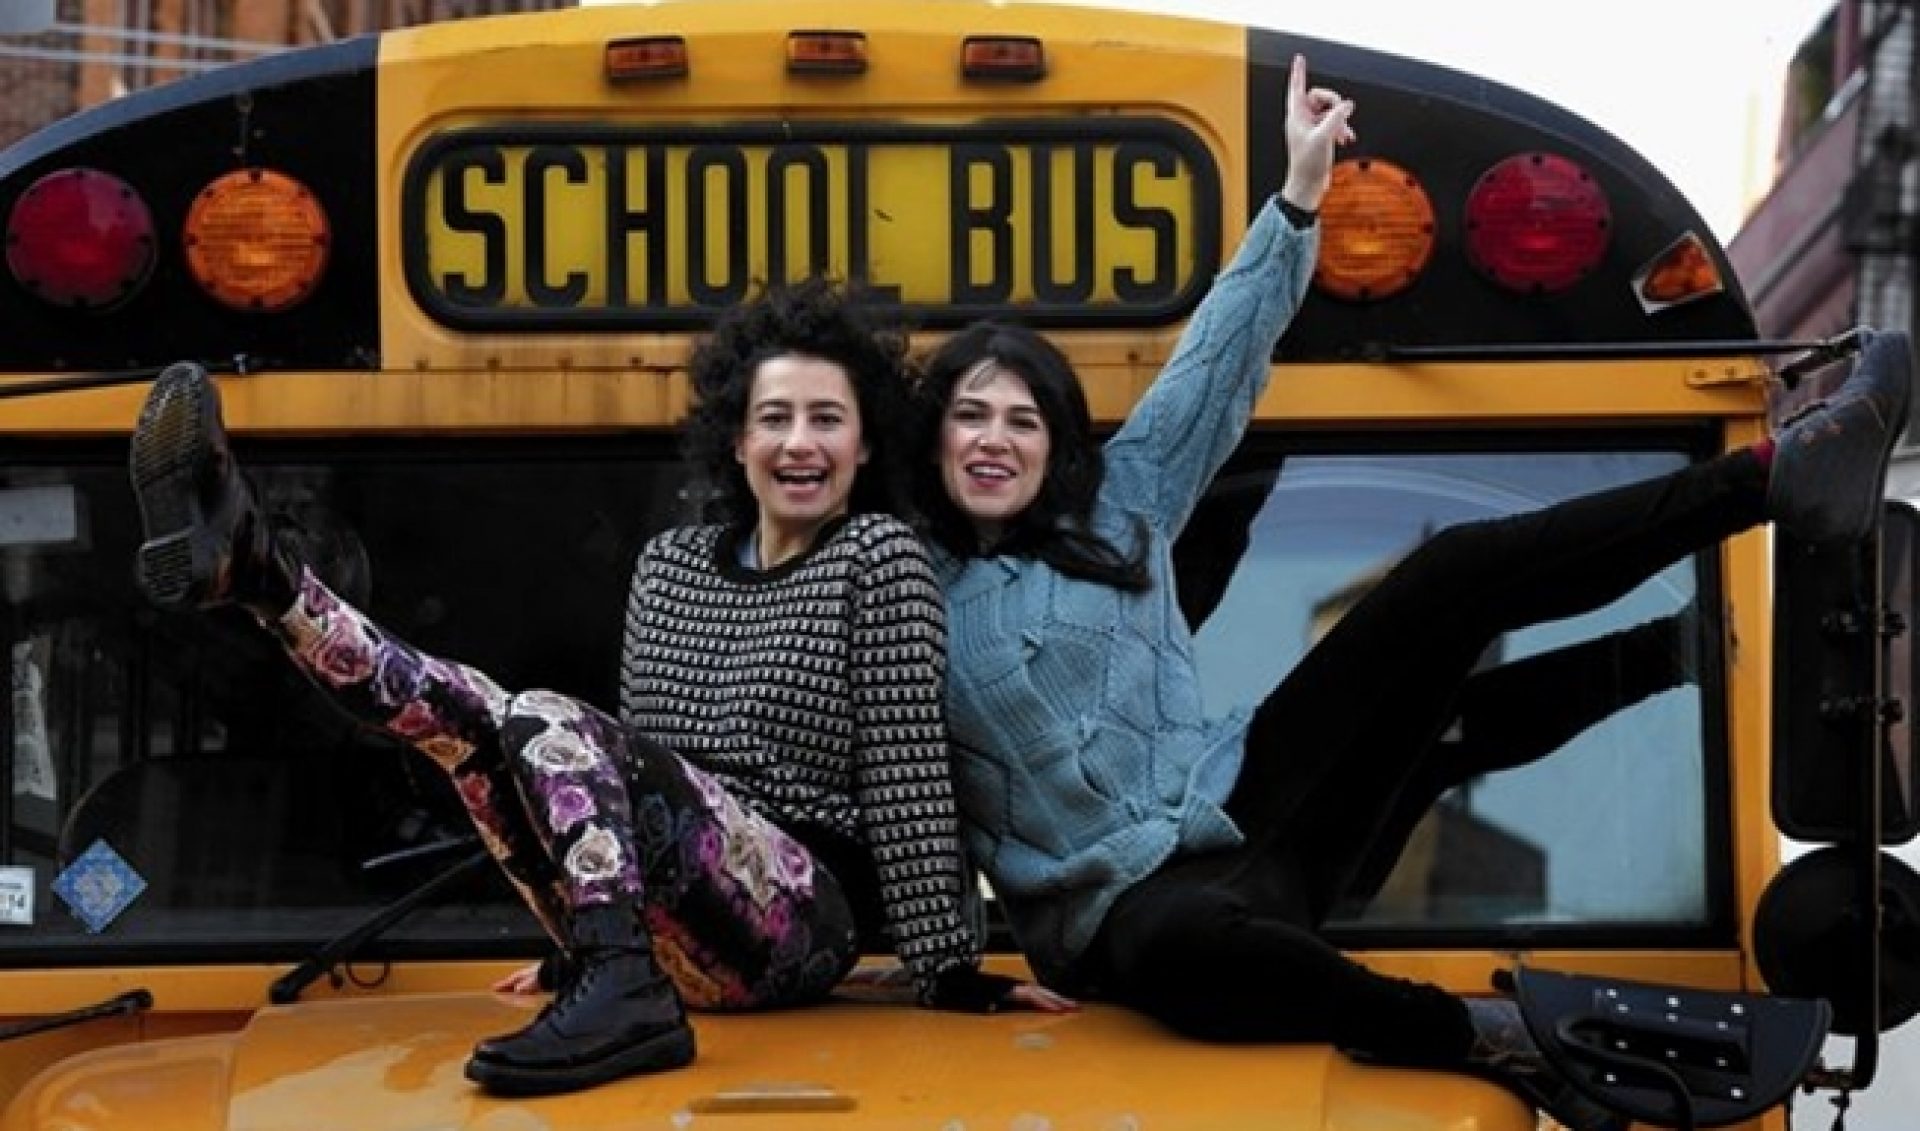 Don’t Forget To Watch Broad City On Comedy Central